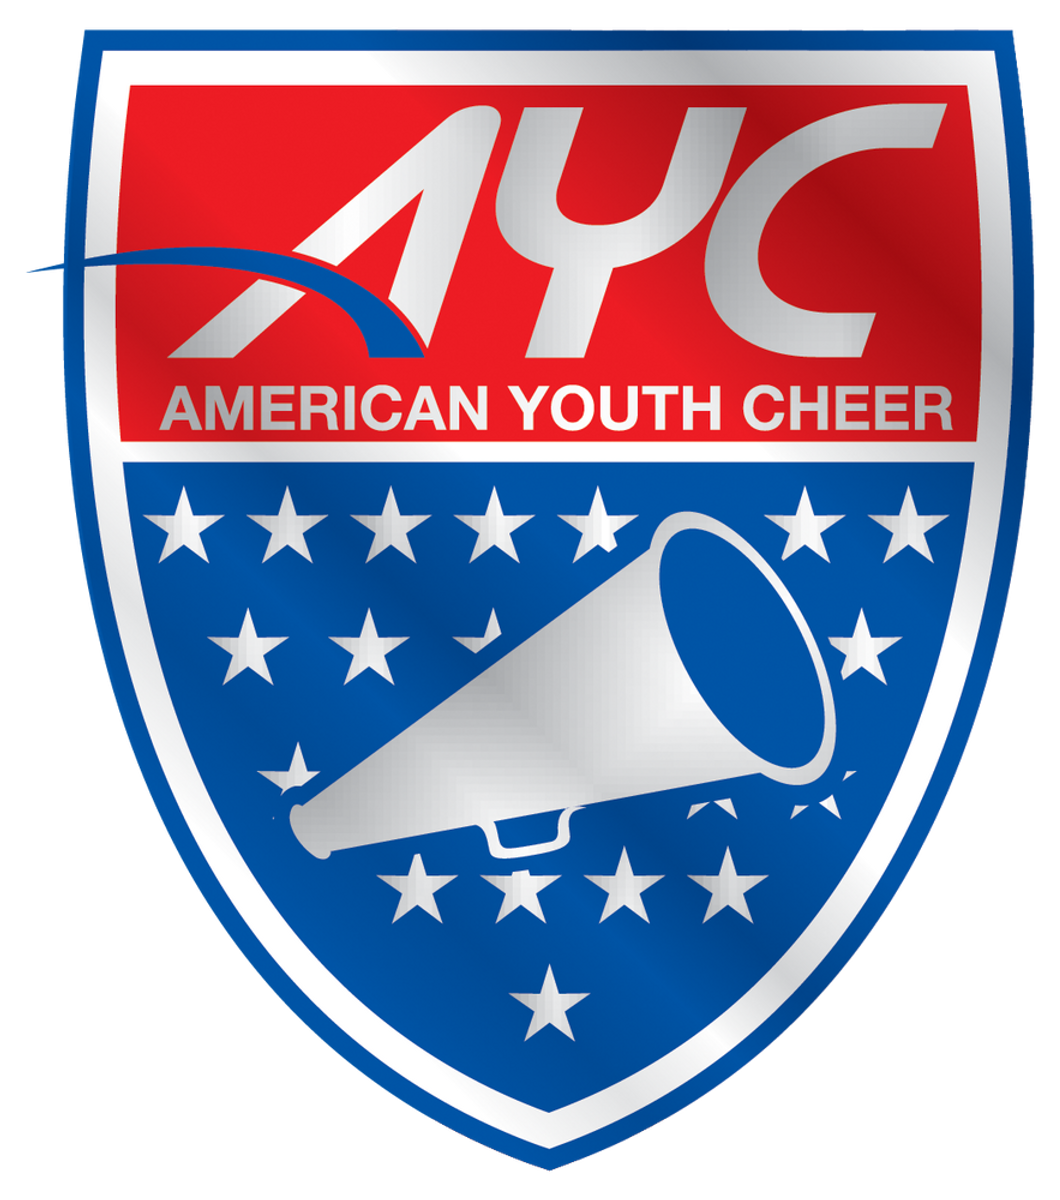 AYF AYC Cheerleading 2014 - New England Regional Cheer Competition DVDs 11/22/14